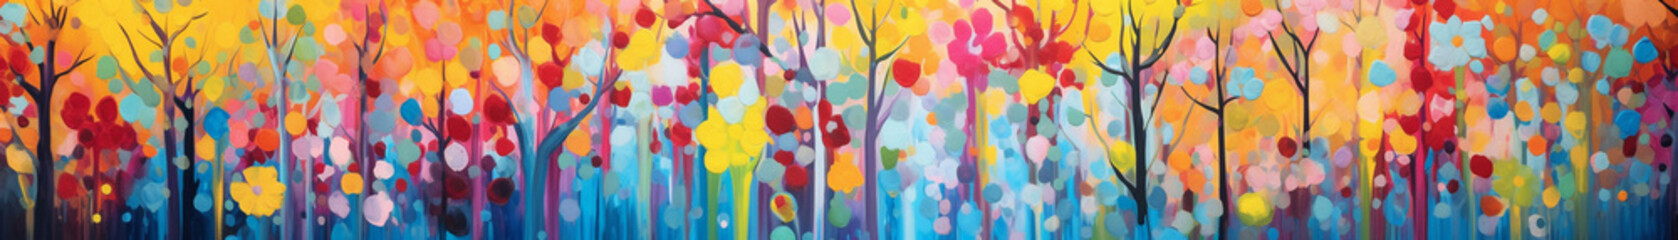 Abstract naive art banner with colorful trees and dots. Beautiful artistic illustration for web or background design